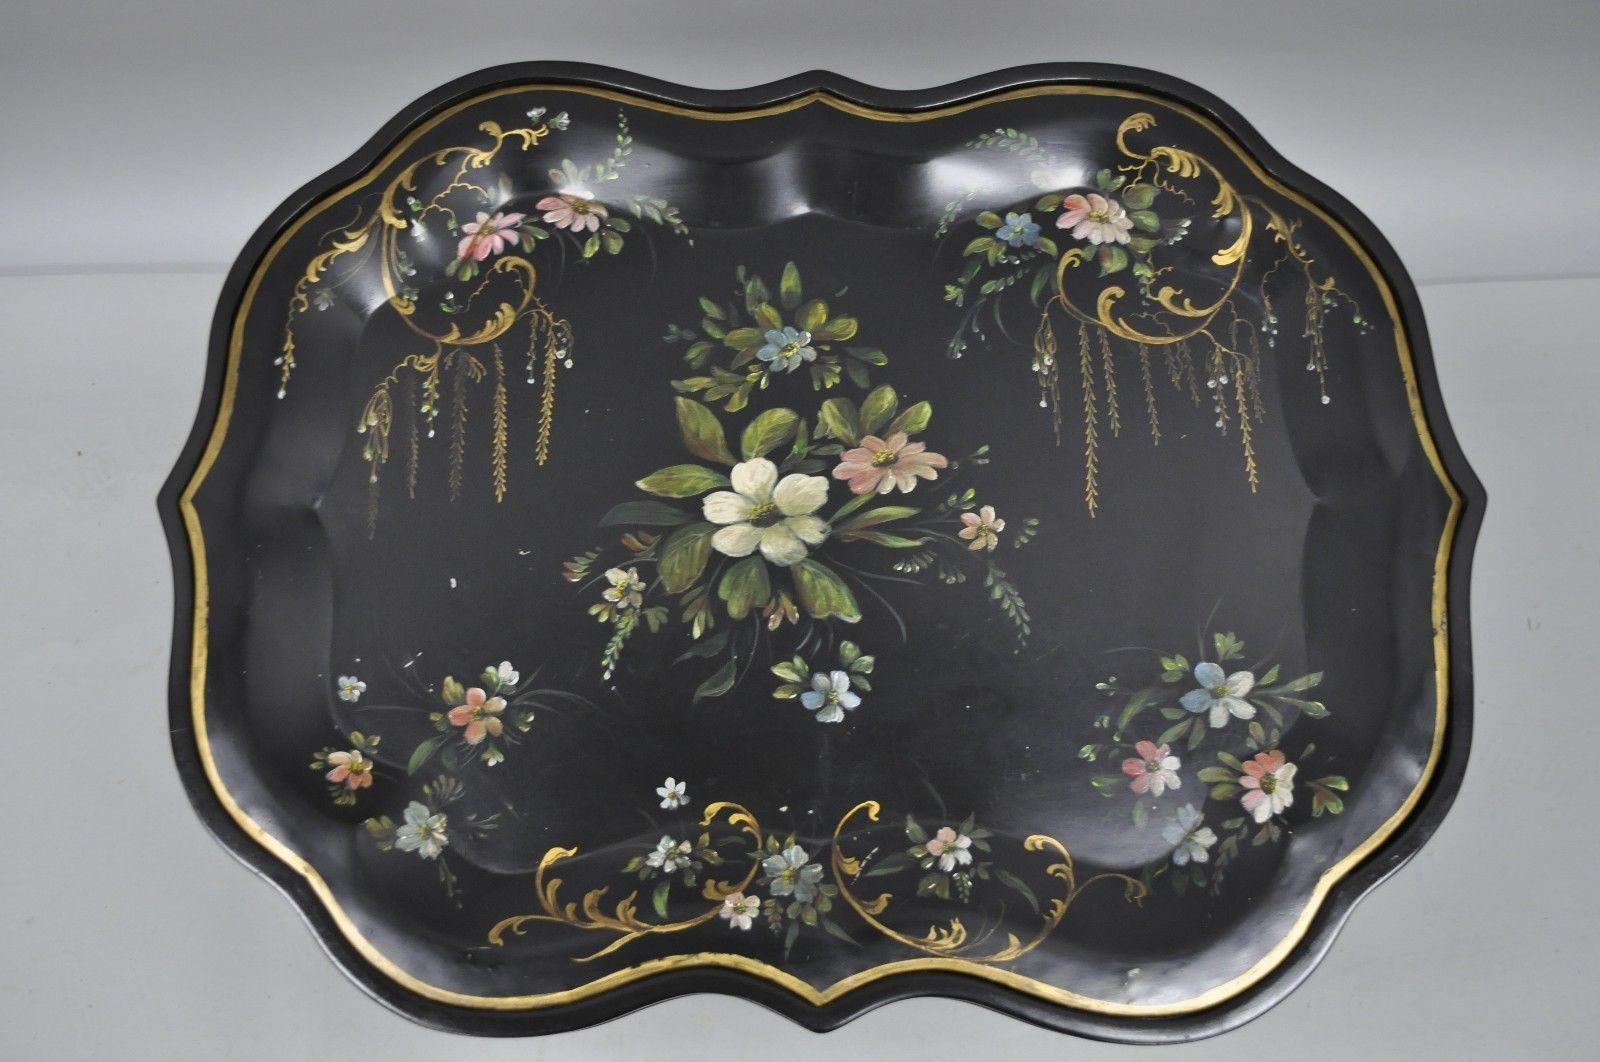 Beautiful hand-painted tole metal serving tray table. Item features removable tole metal scalloped tray, hand-painted details, wooden faux bamboo base, and elegant style and form, circa mid- late 20th century. Measurements: 22